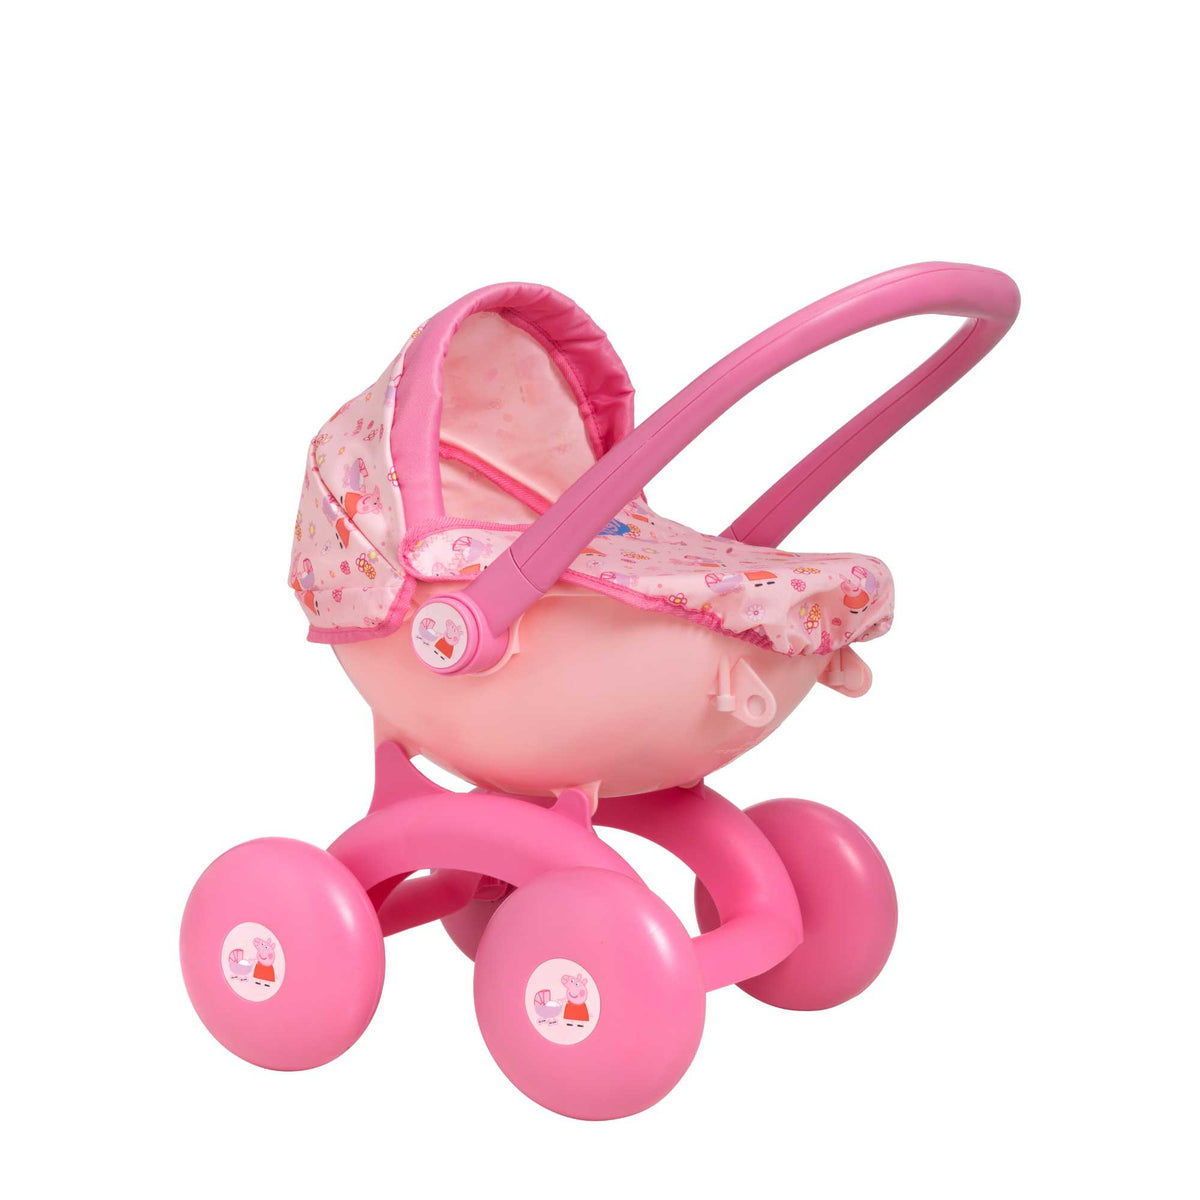 Peppa Pig 4-IN-1 My First Pram: A pink and white toy pram featuring Peppa Pig graphics, designed for toddlers with four versatile play modes, perfect for imaginative play and doll carrying.